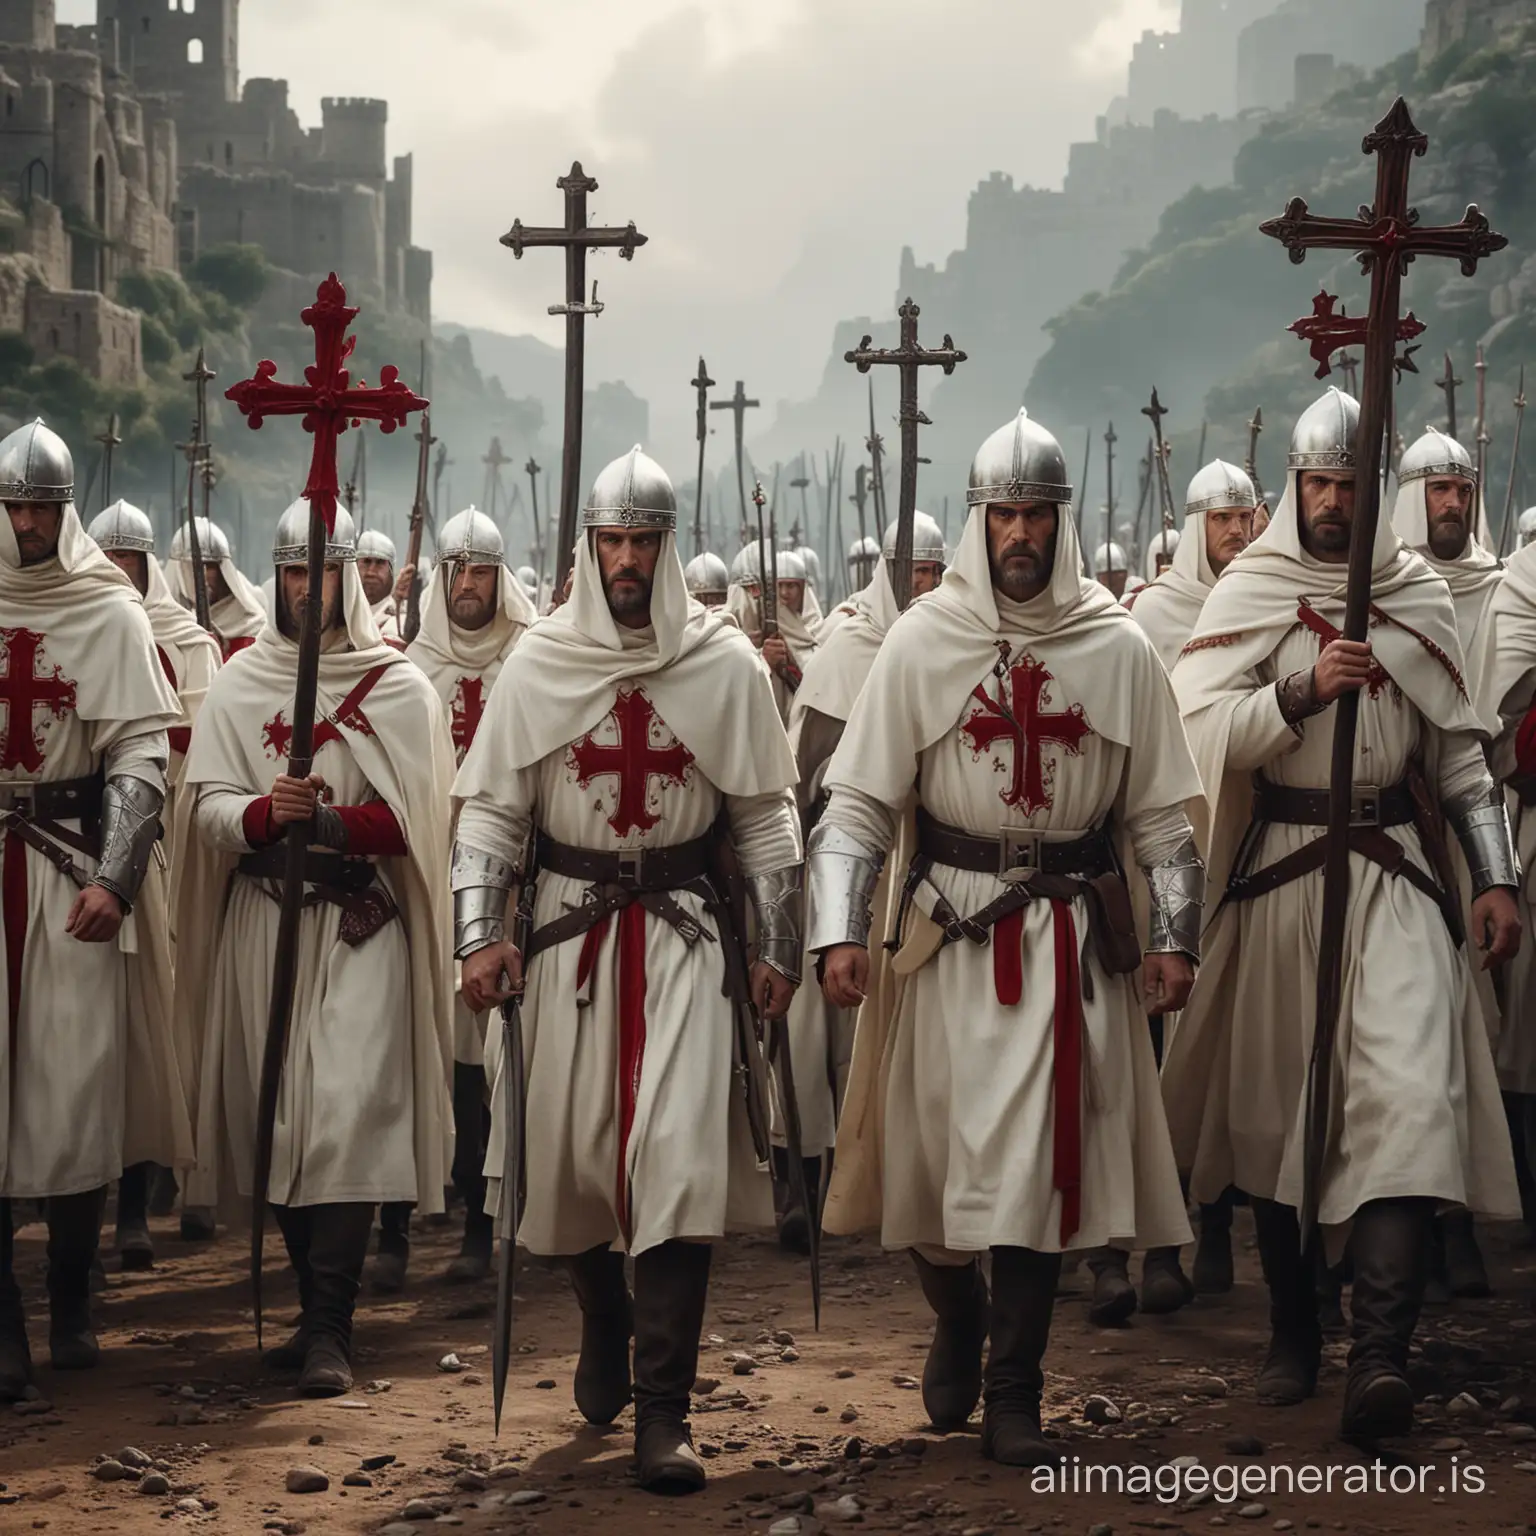 Epic-Hyper-Realistic-Cinematography-Cathare-Crusaders-Marching-to-Battle